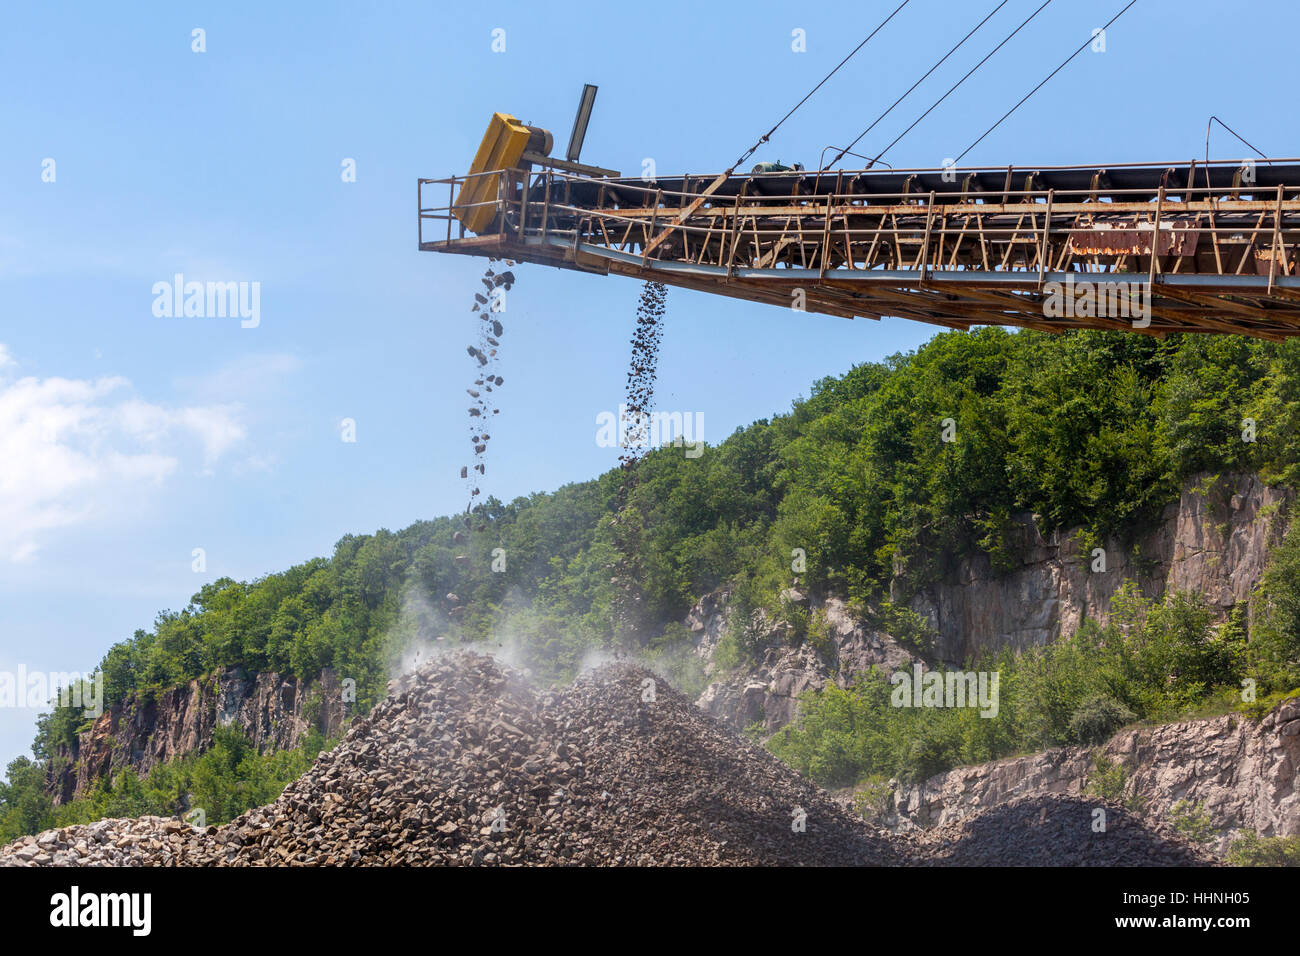 A conveyor belt transports crushed rock in a rock quarry into large mounds. Stock Photo